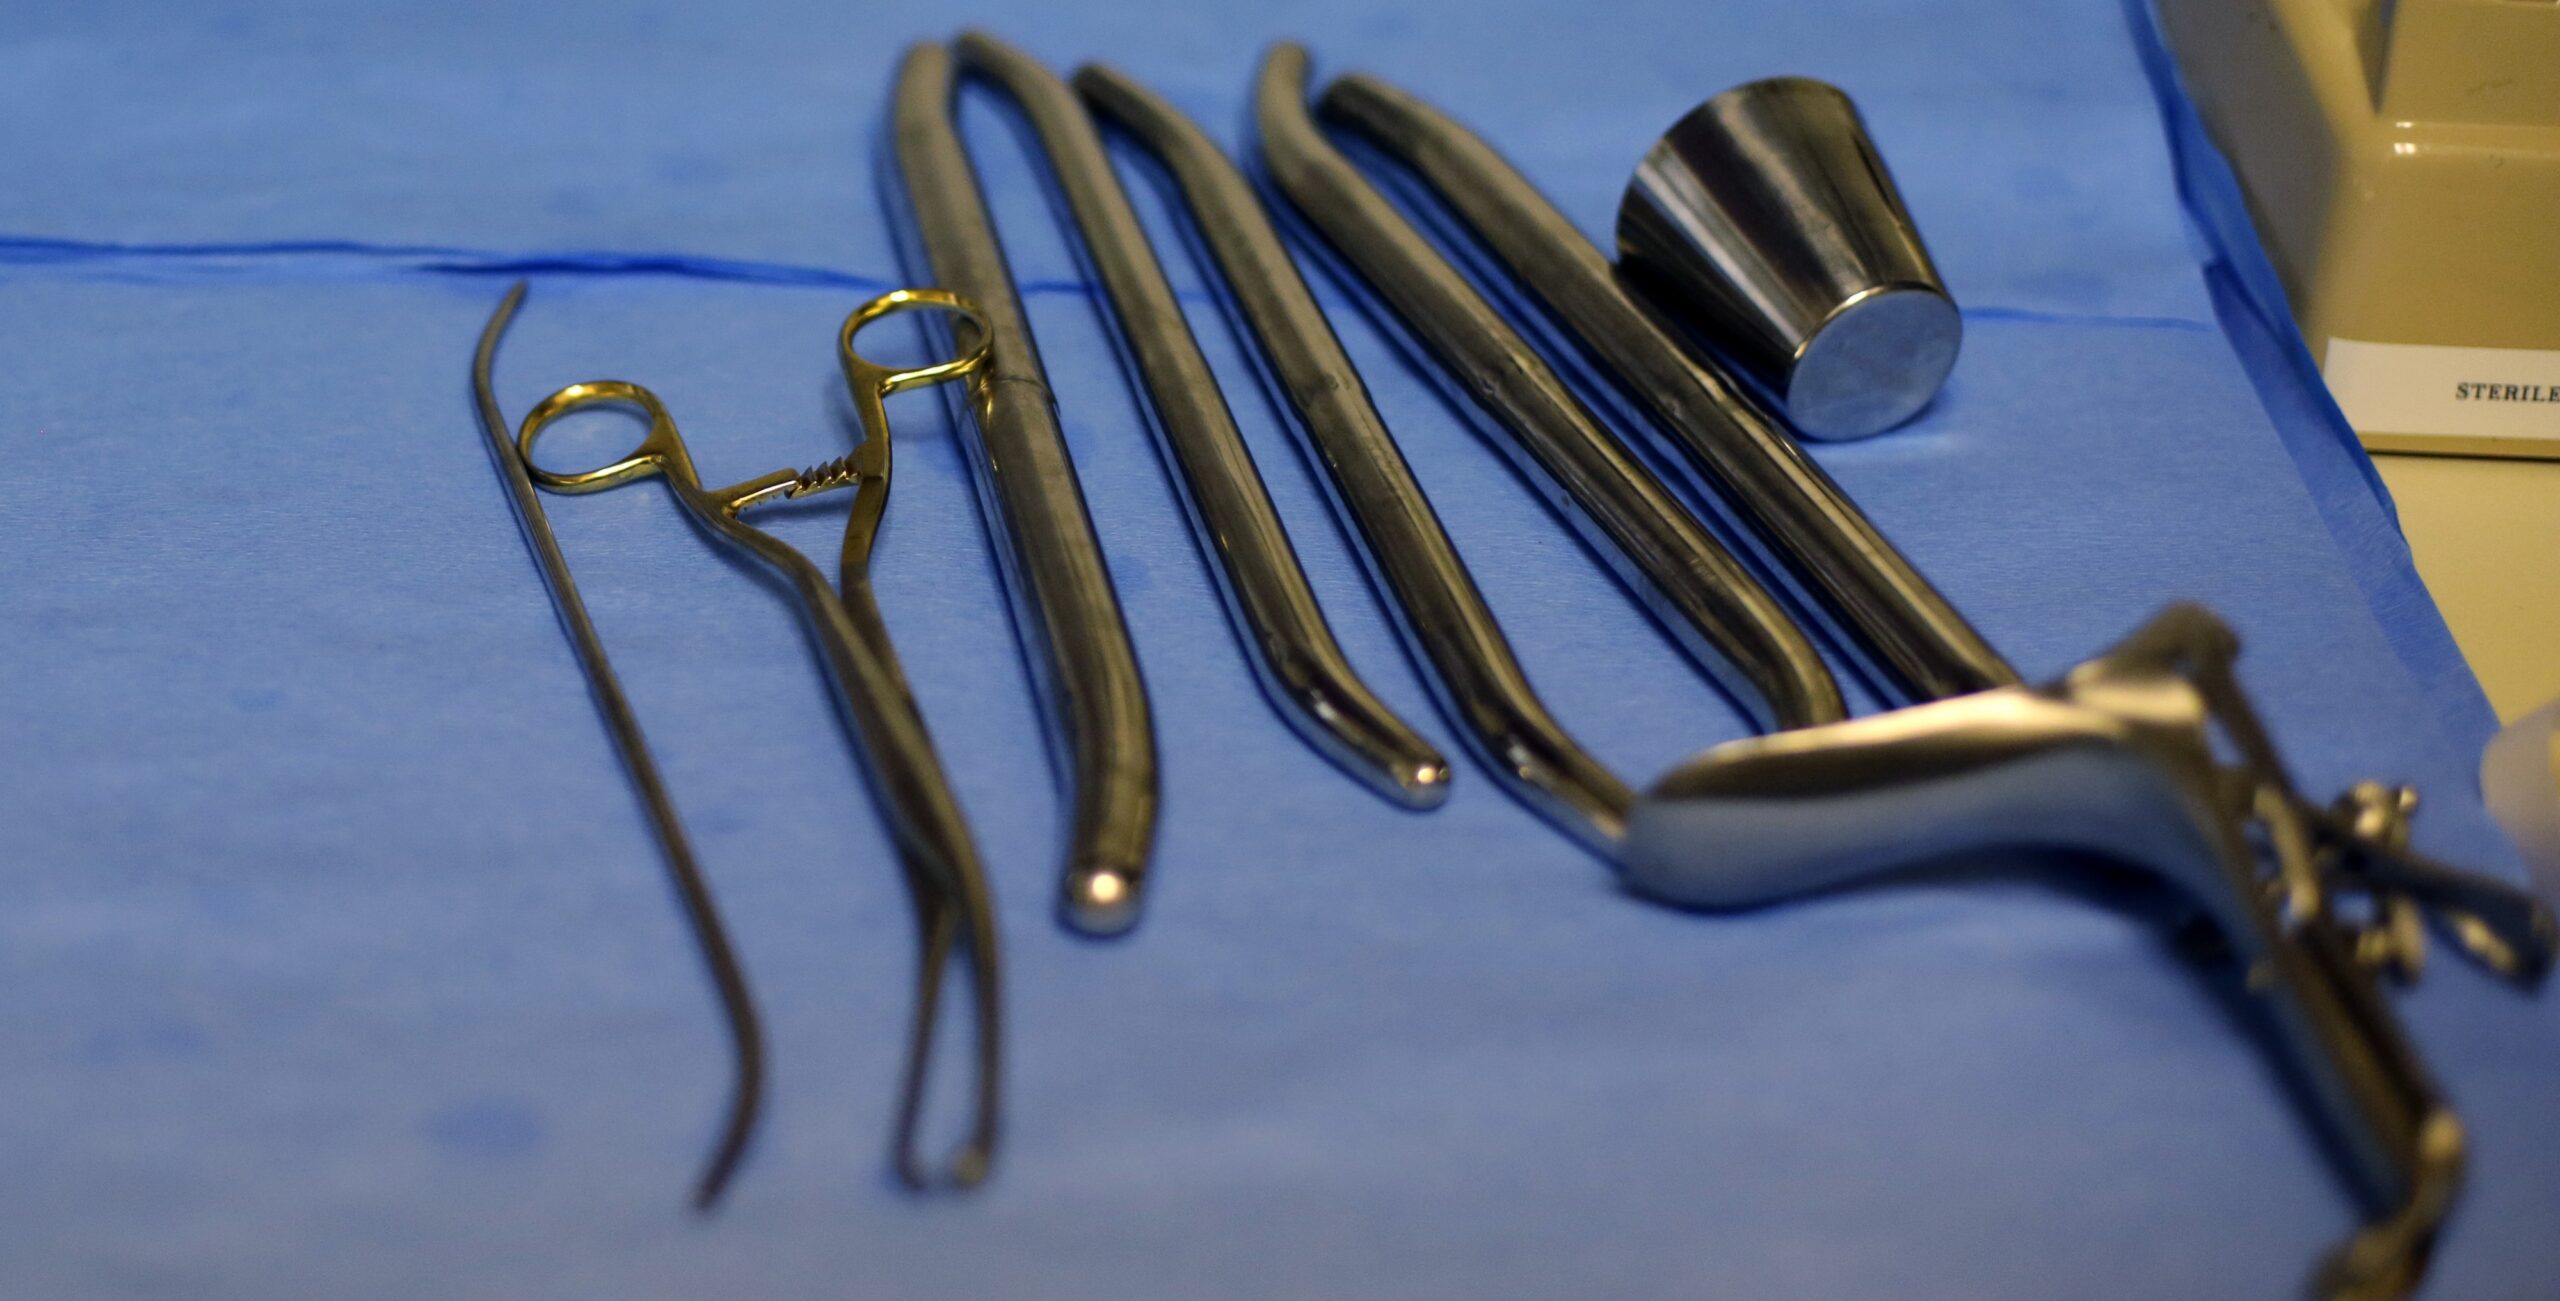 medical implements — like a speculum — for women's health at a clinic